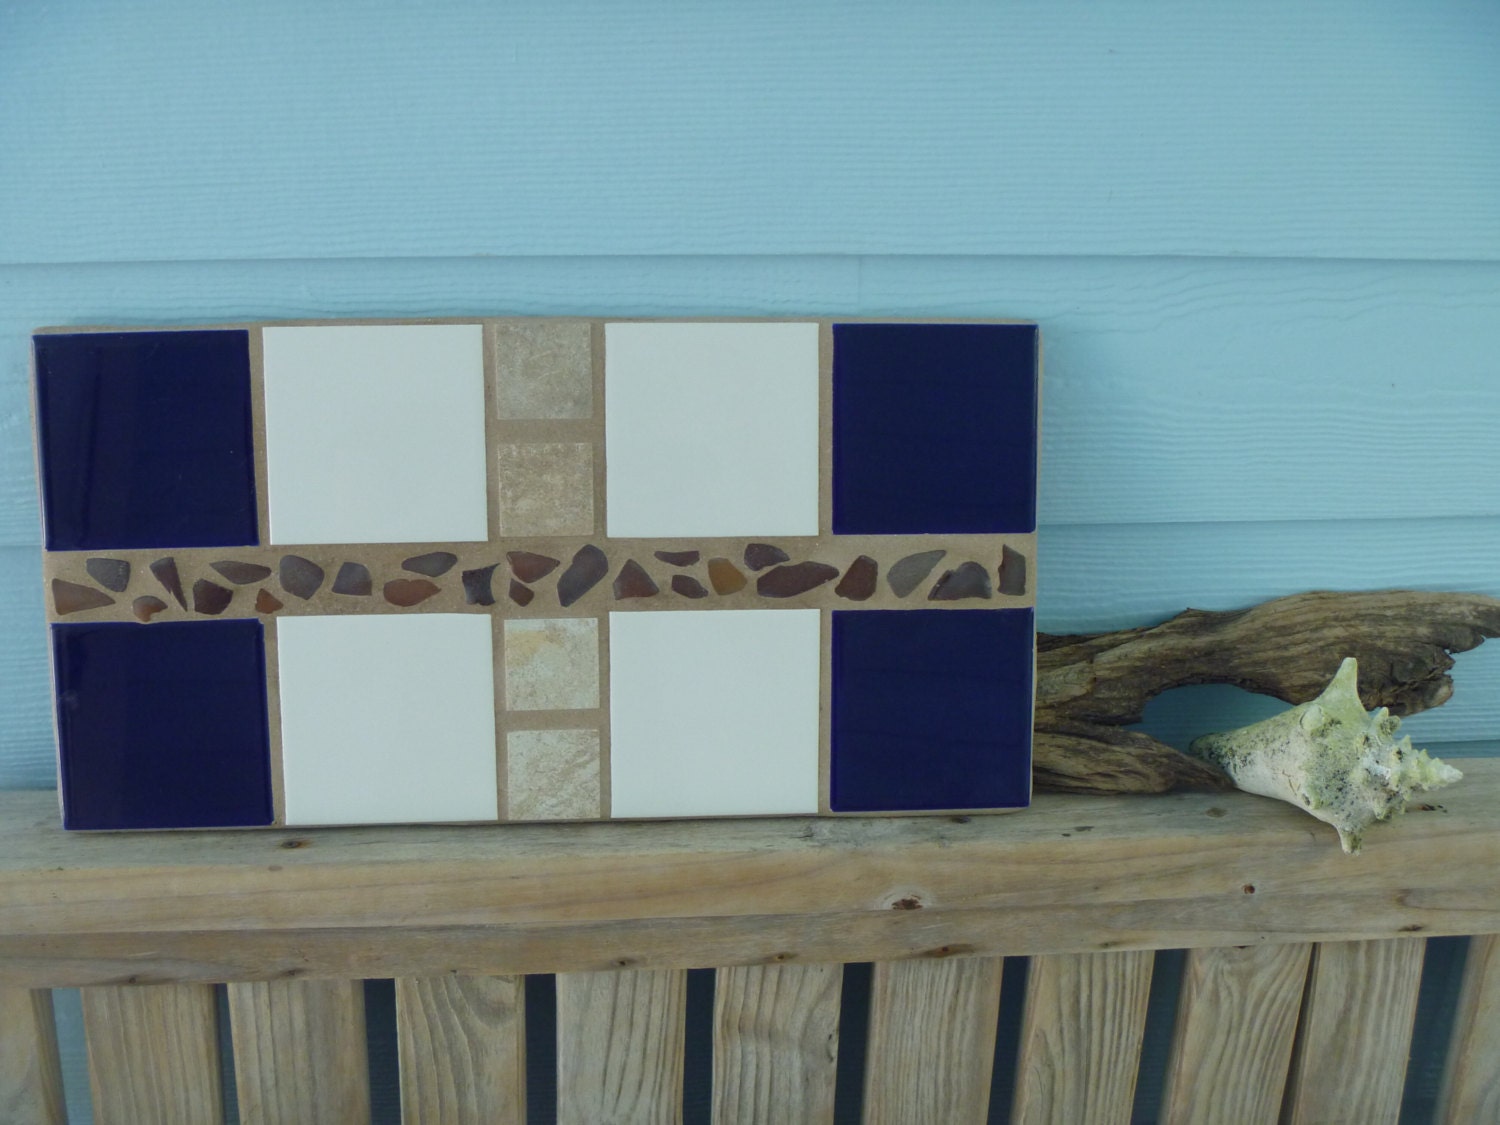 Seaglass with blue and white tiles outdoor wall decor -  coastal home accents - SurfStreetDesigns